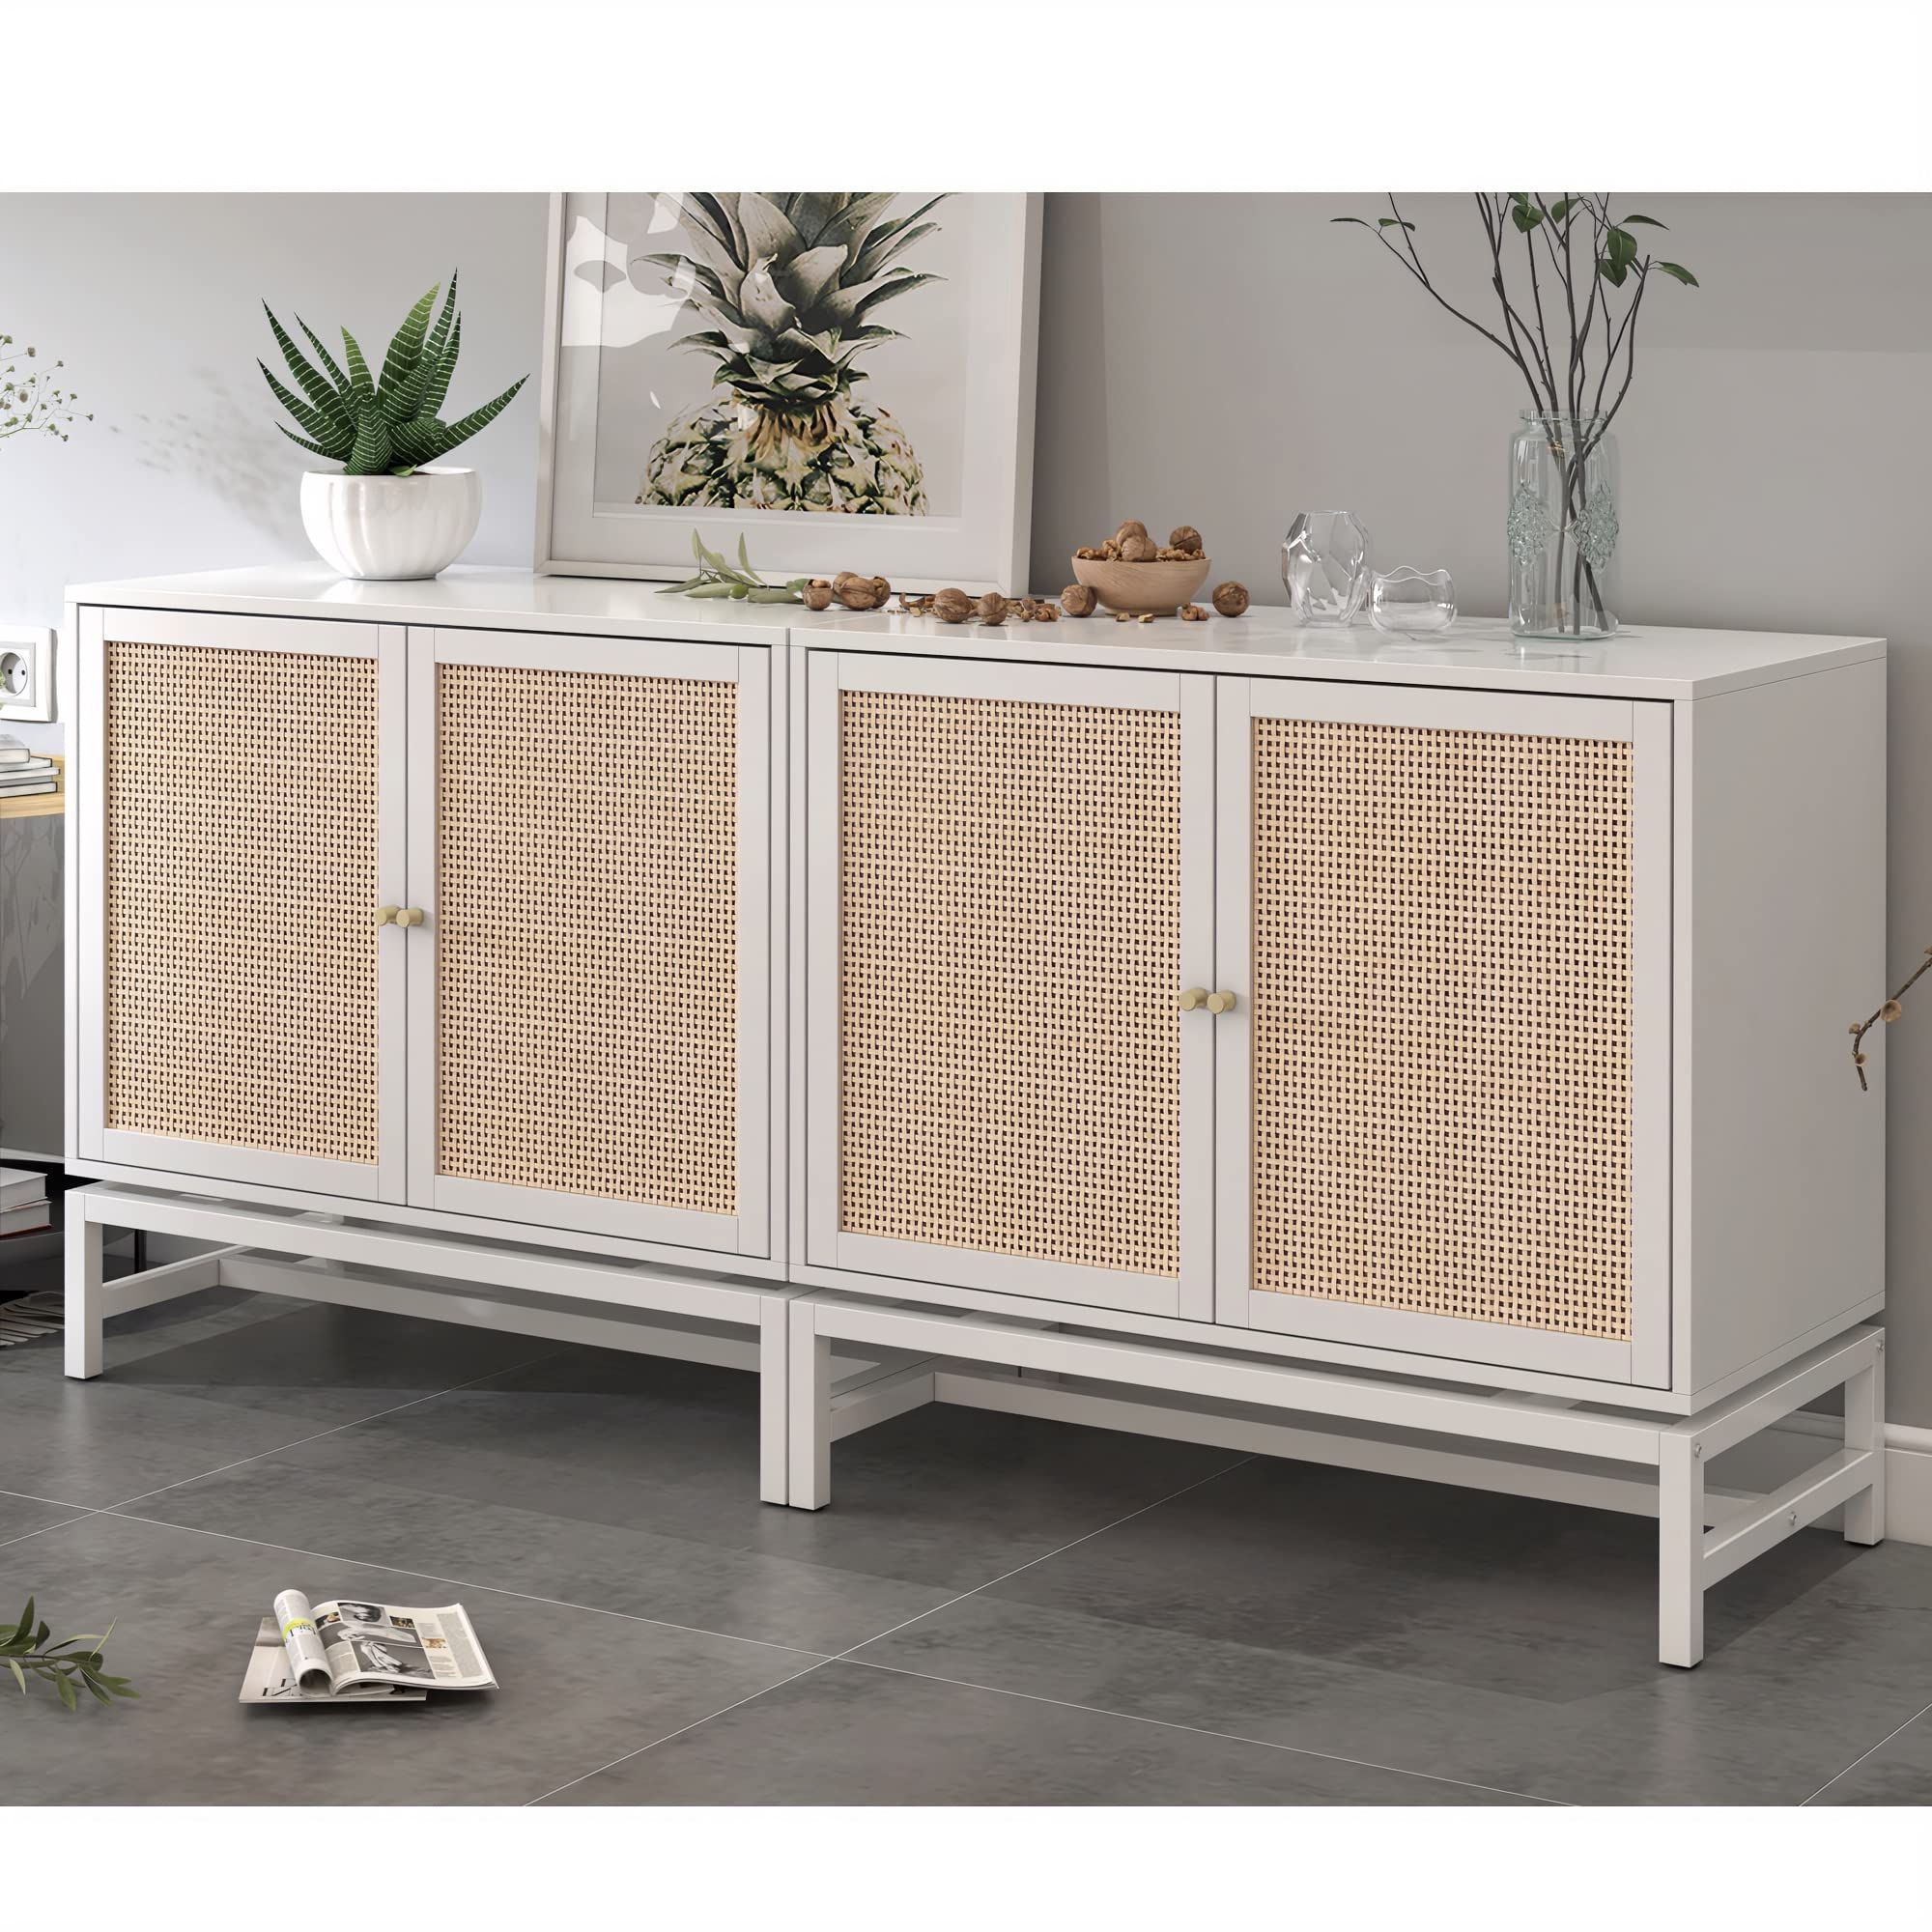 Amazon – Awqm 2pcs Rattan Sideboard Buffet Cabinet With  Storage,kithchen Accent Storage Cabinet With Doors Console Table With  Adjustable Shelves,wood Console Cabinet For Dining Room,living Room,white –  Buffets & Sideboards Pertaining To Recent Assembled Rattan Buffet Sideboards (Photo 6 of 10)